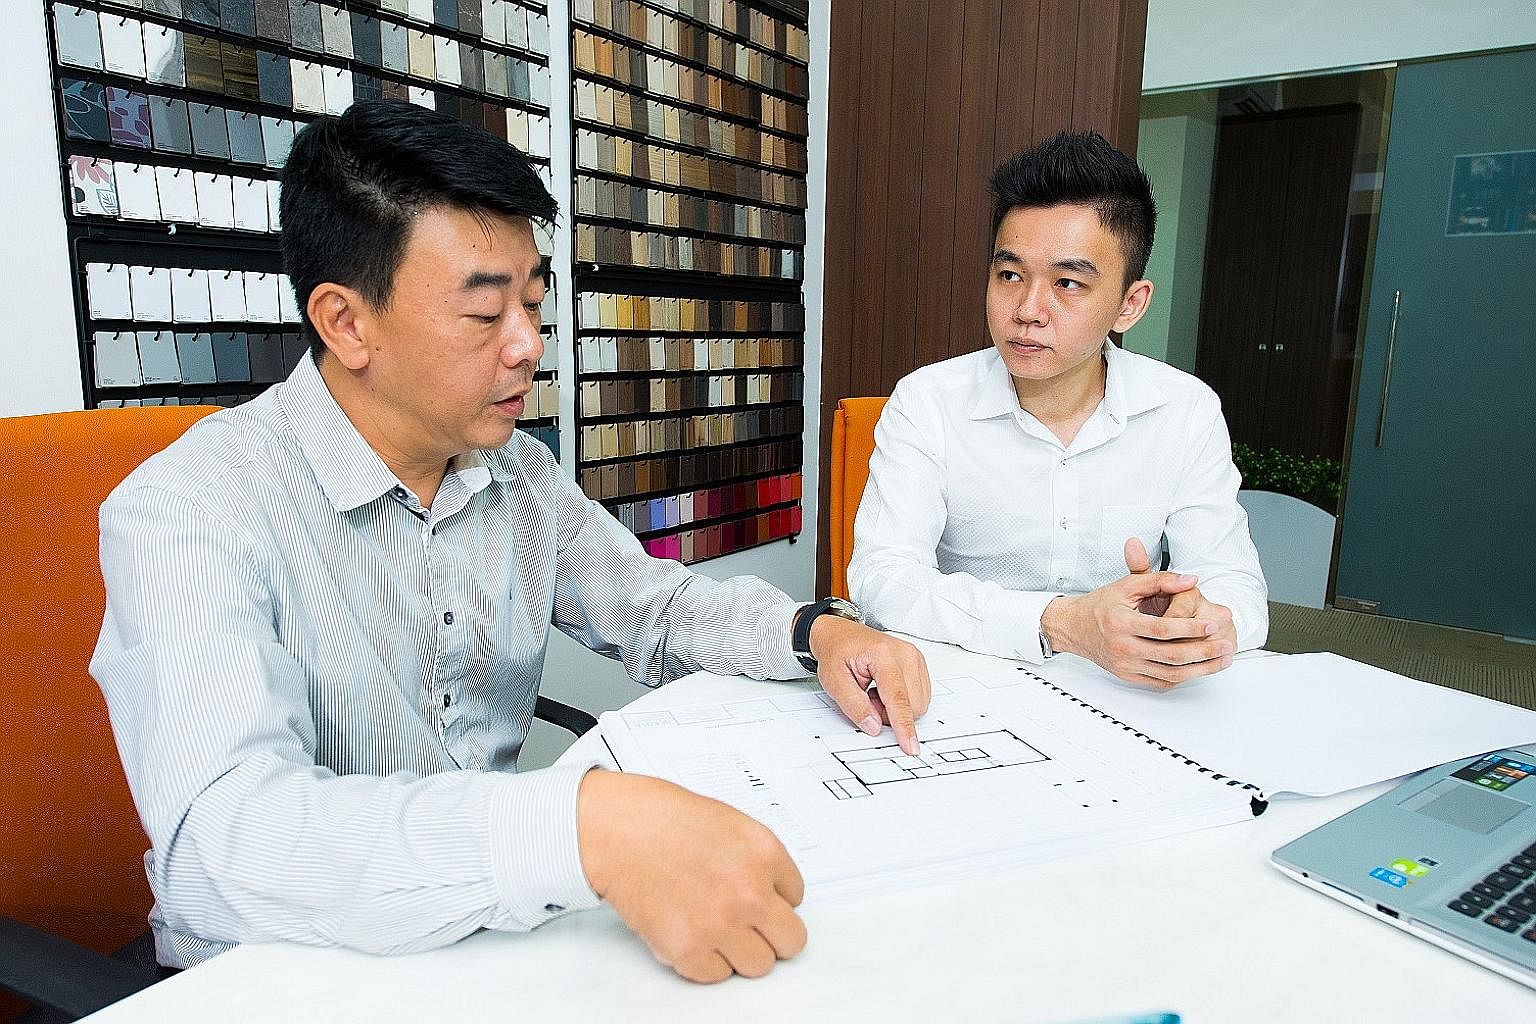 New Union founders Lee Yue Cheng (left) and Eddie Lee. The start-up has raised over $21 million for about 40 SMEs.